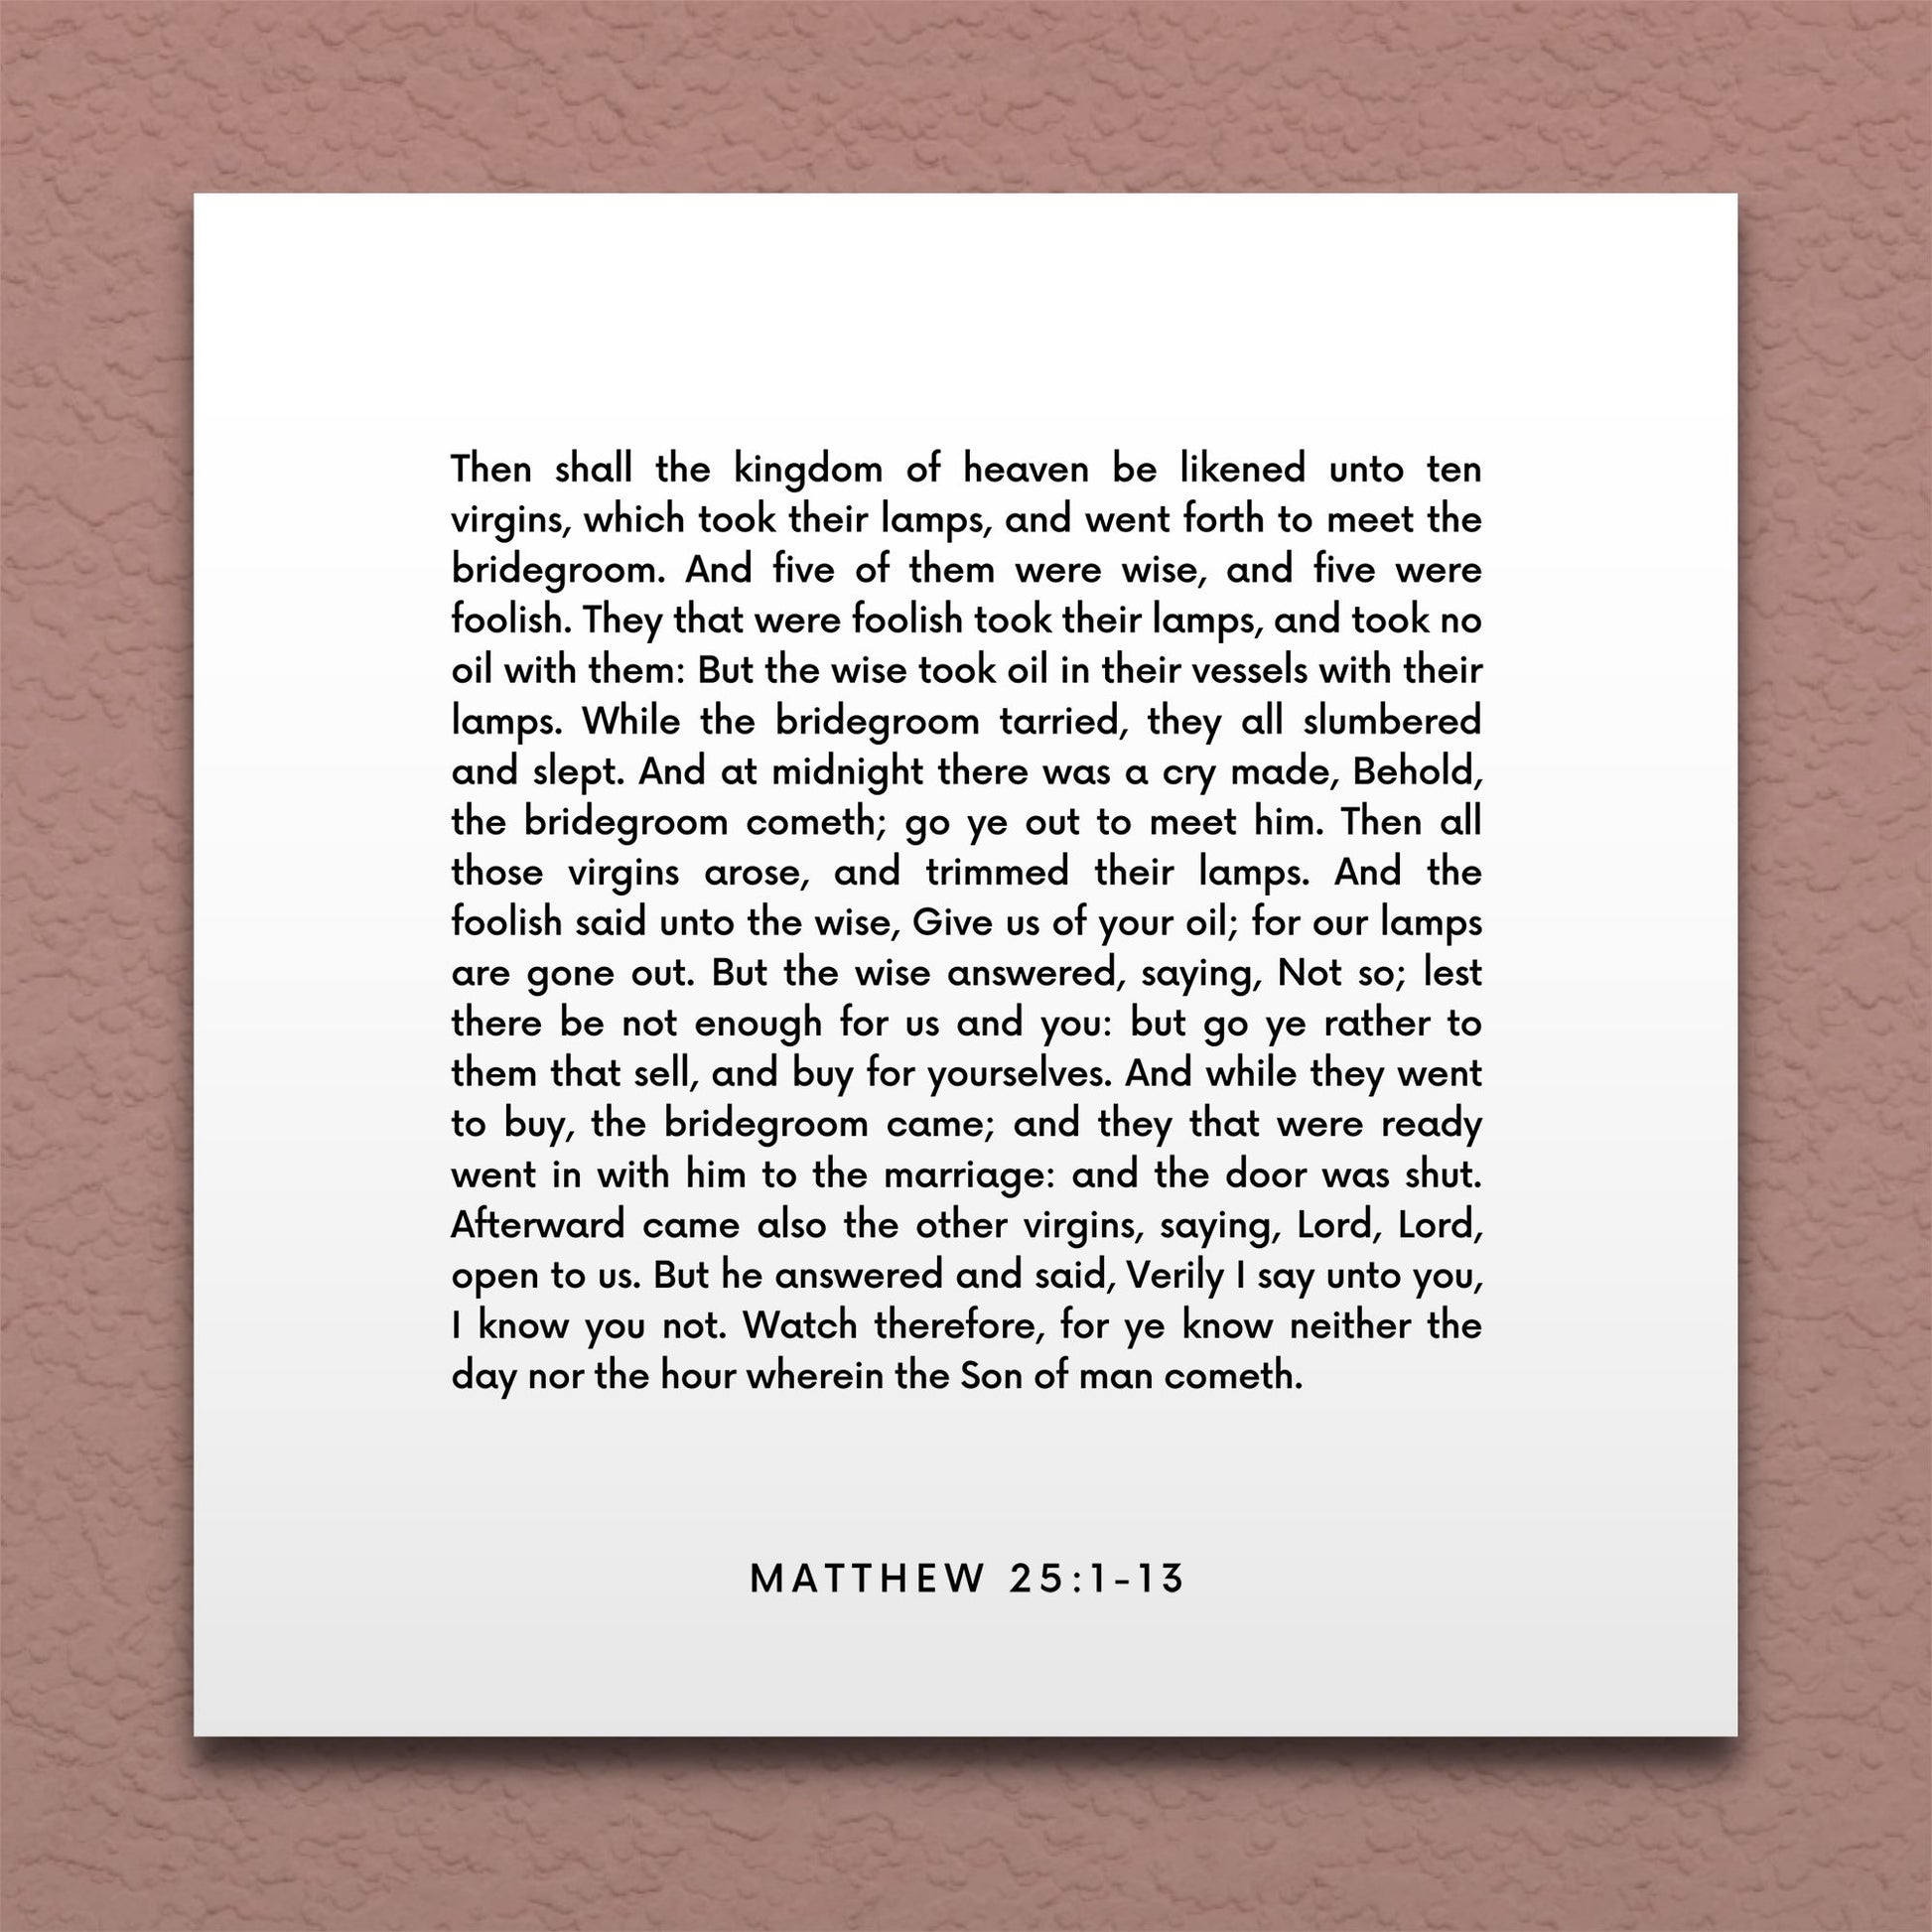 Wall-mounted scripture tile for Matthew 25:1-13 - "Five of them were wise"